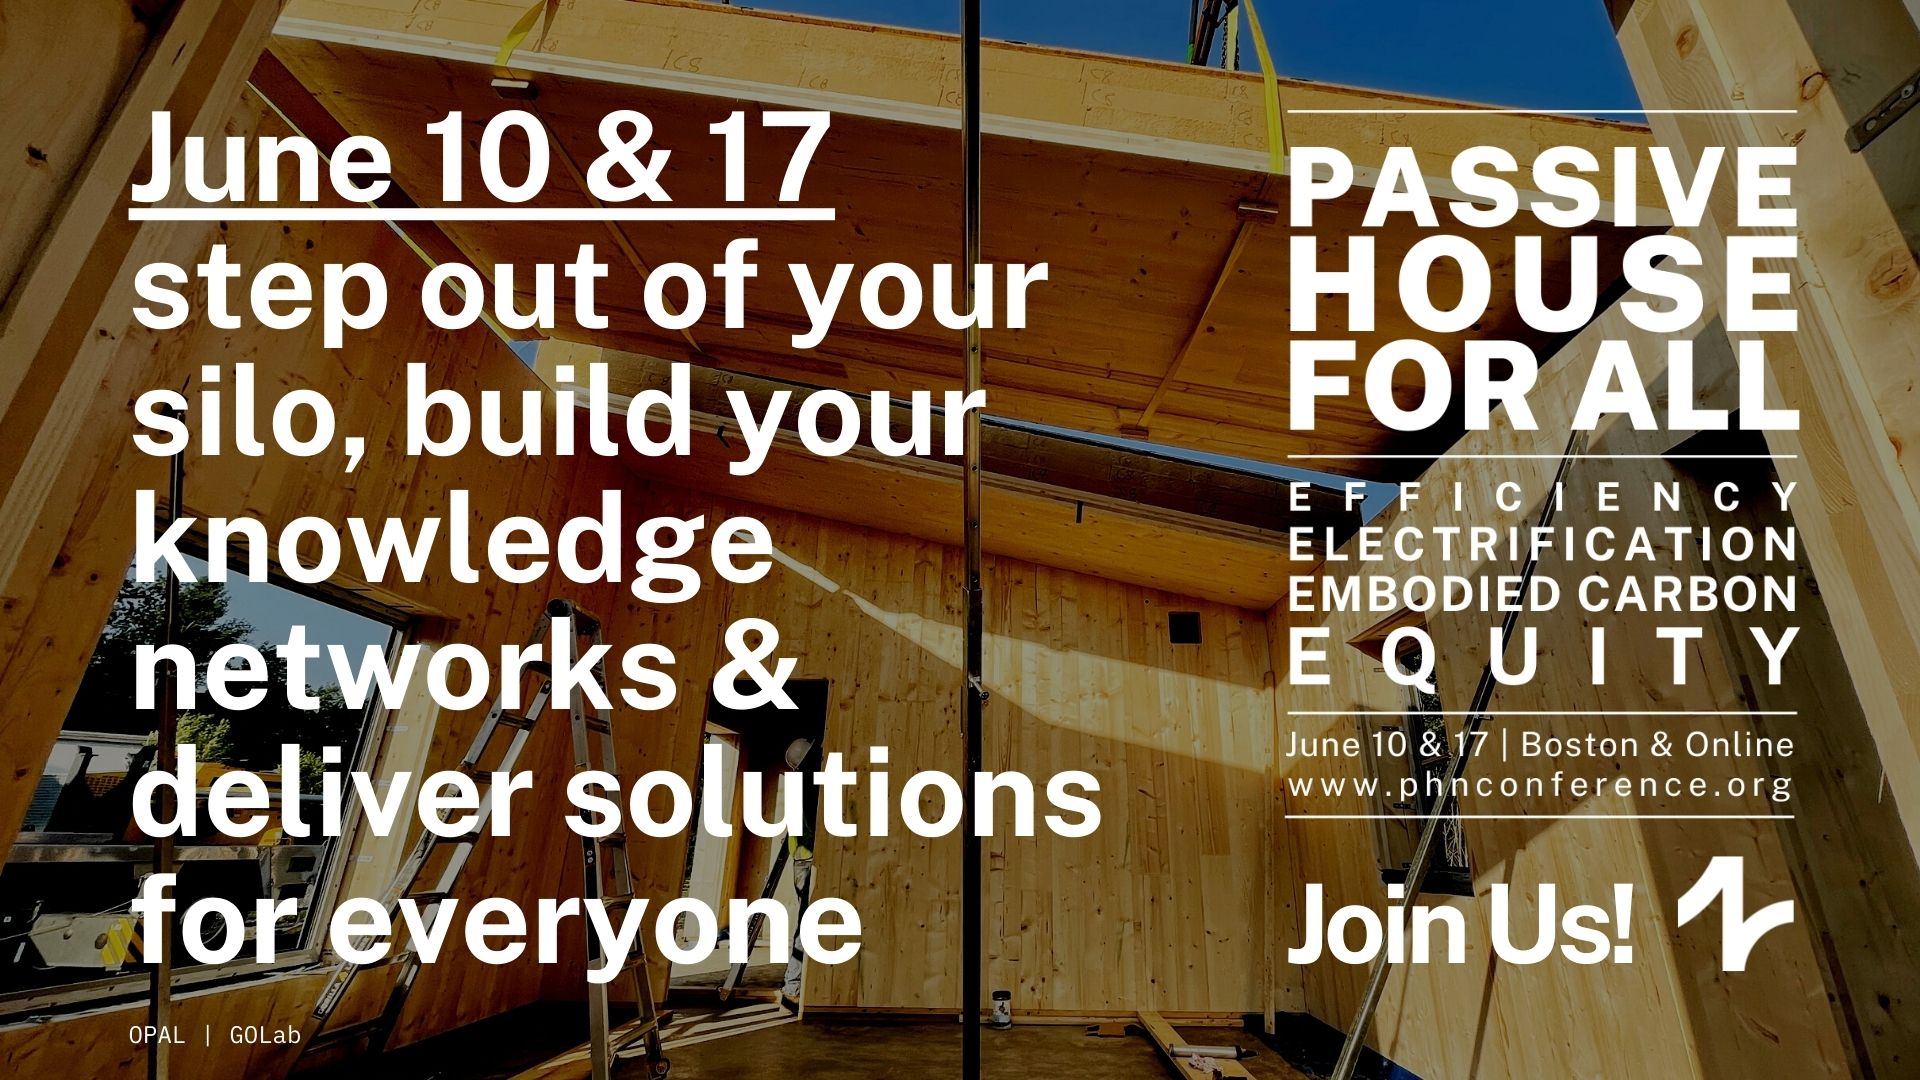 Dr. Wolfgang Feist will Address the Passive House Network Conference